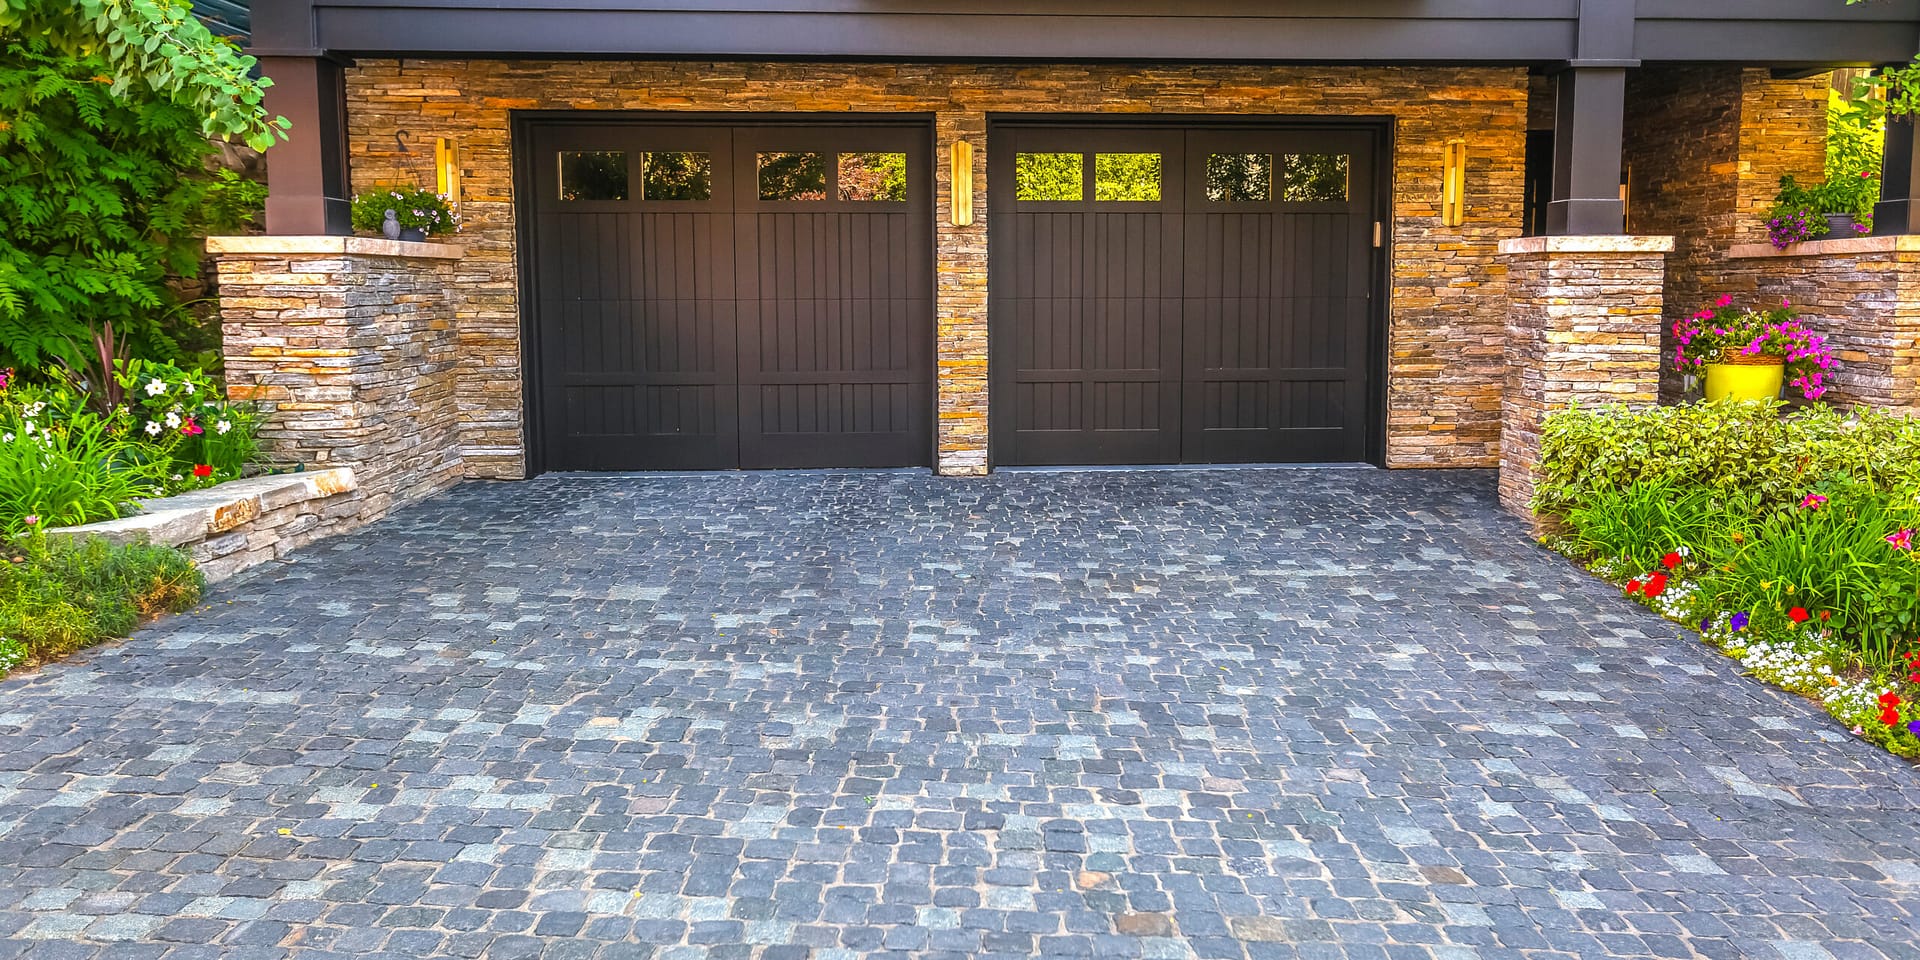 View of a two-door garage installation showing the property’s attractive hardscape. Partner with local splash to drive more clients to your garage door business.